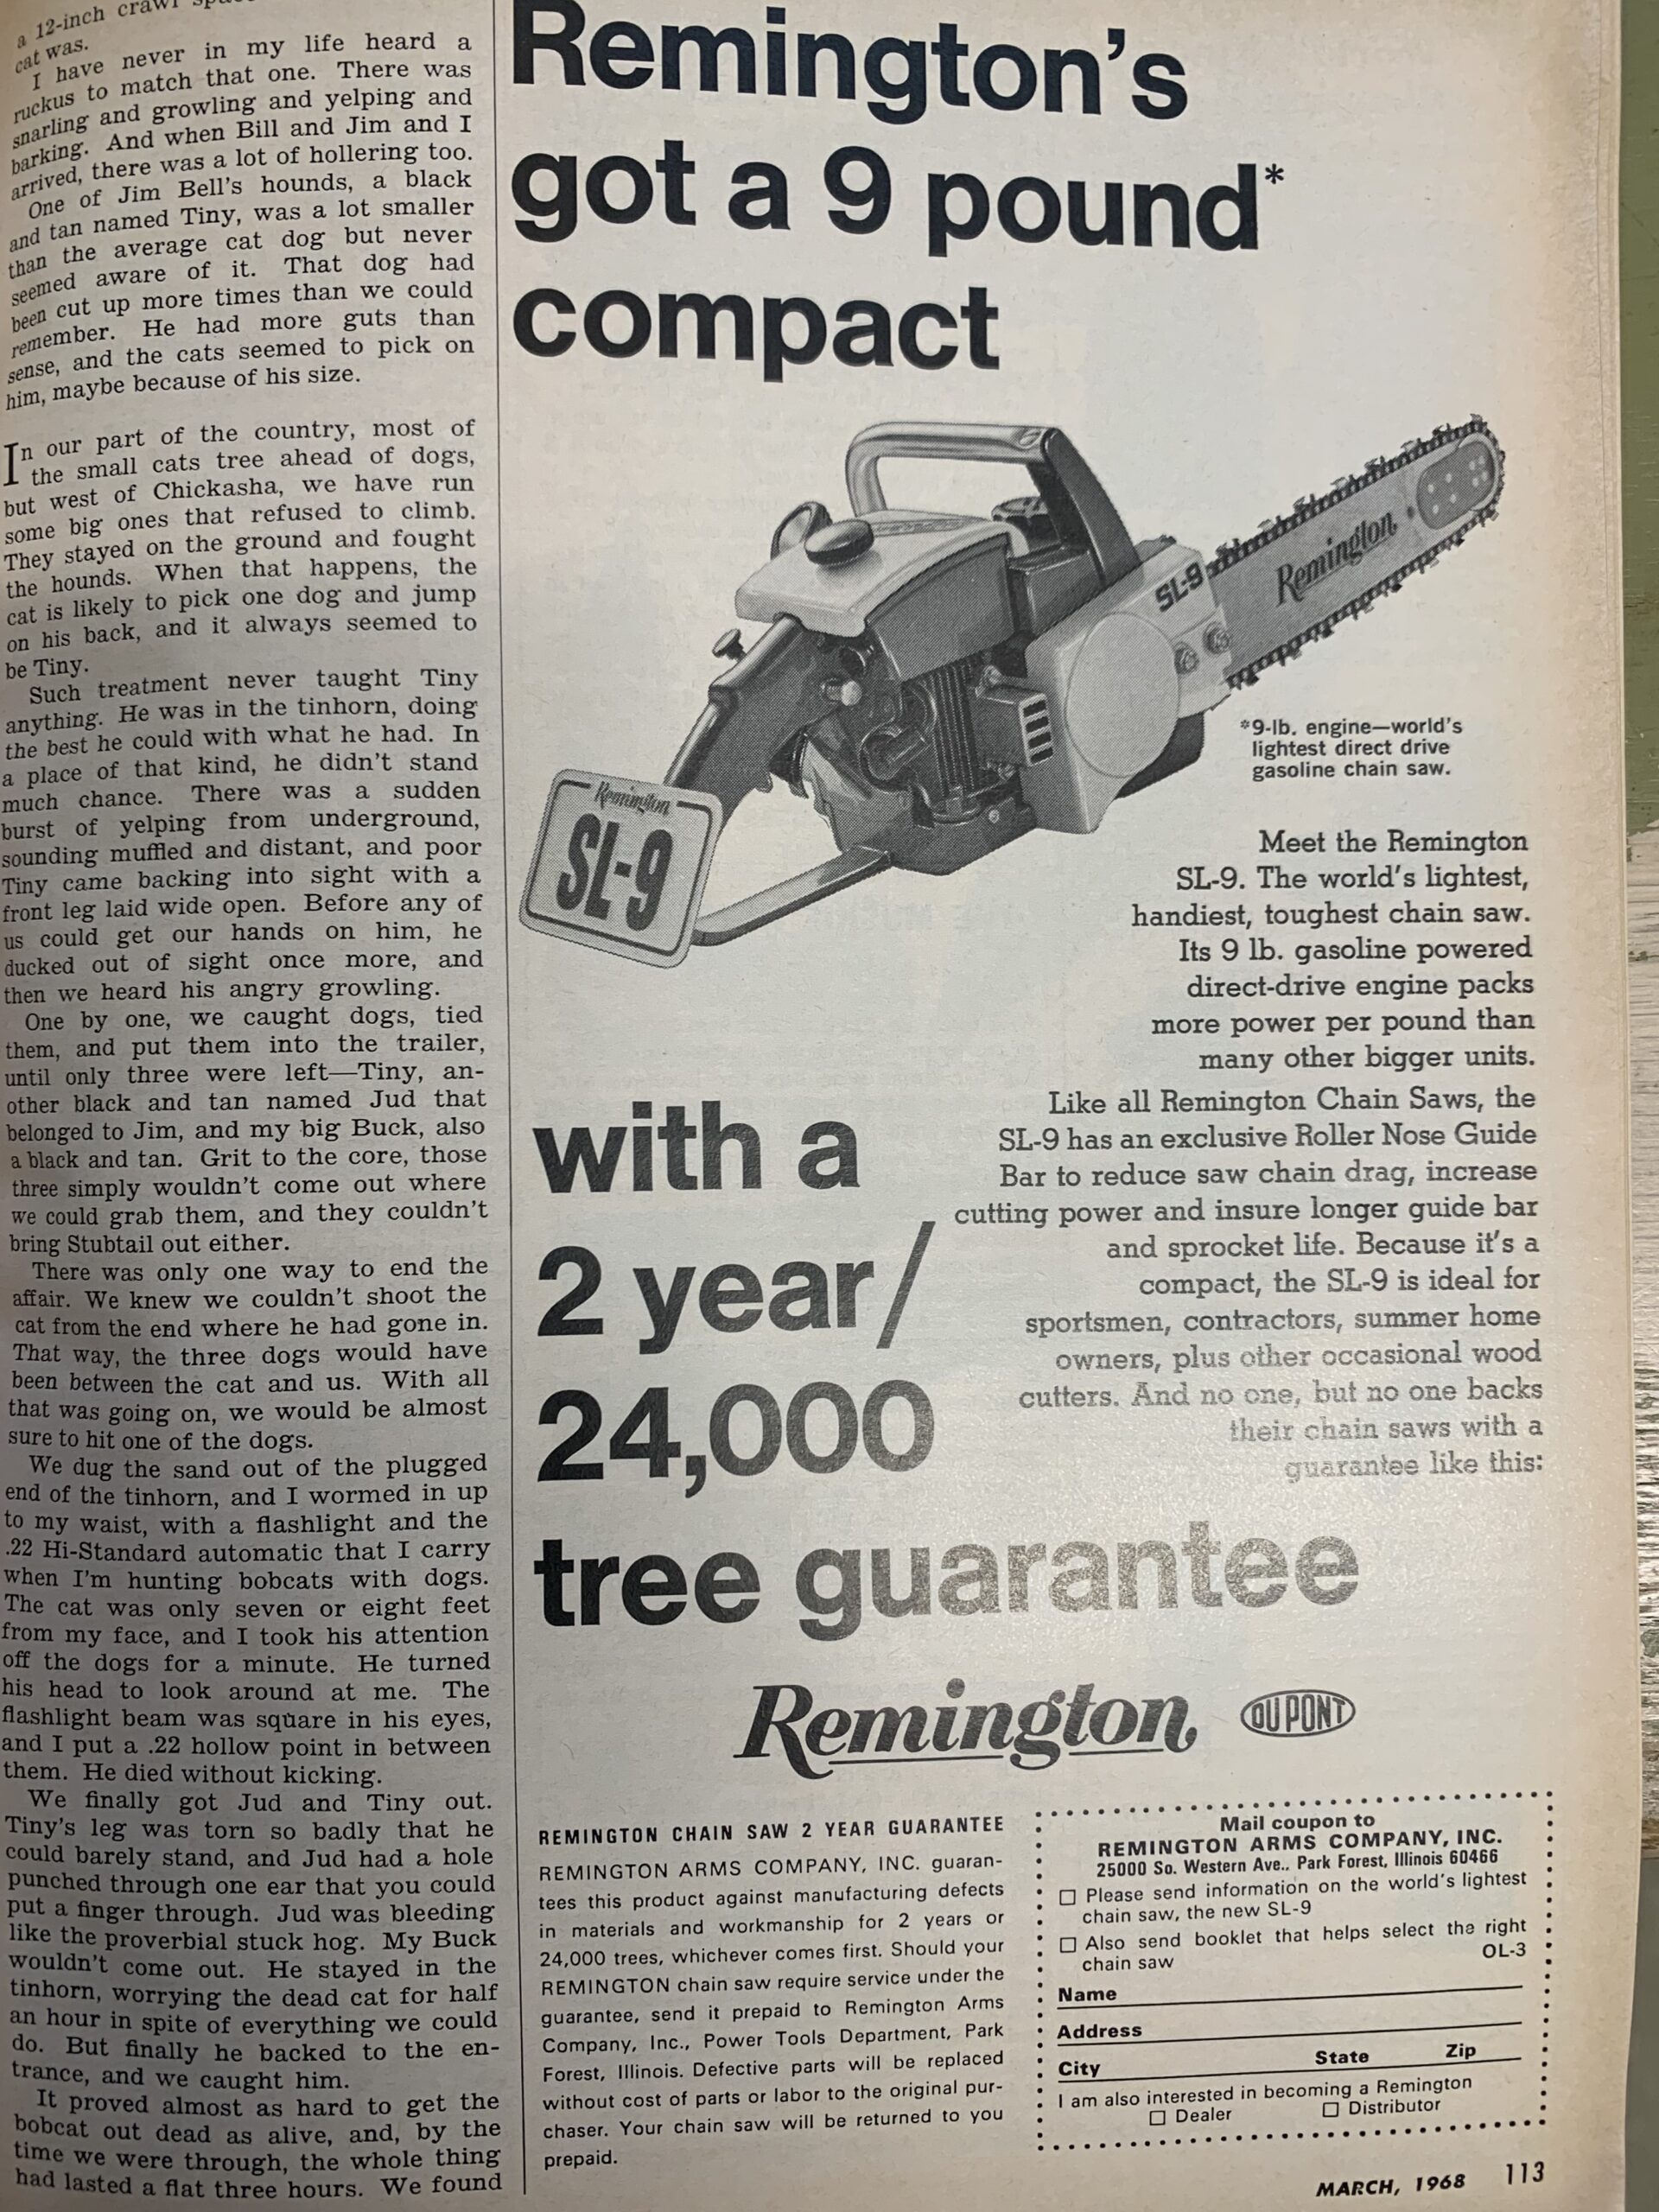 Vintage ad for Remington Chainsaw